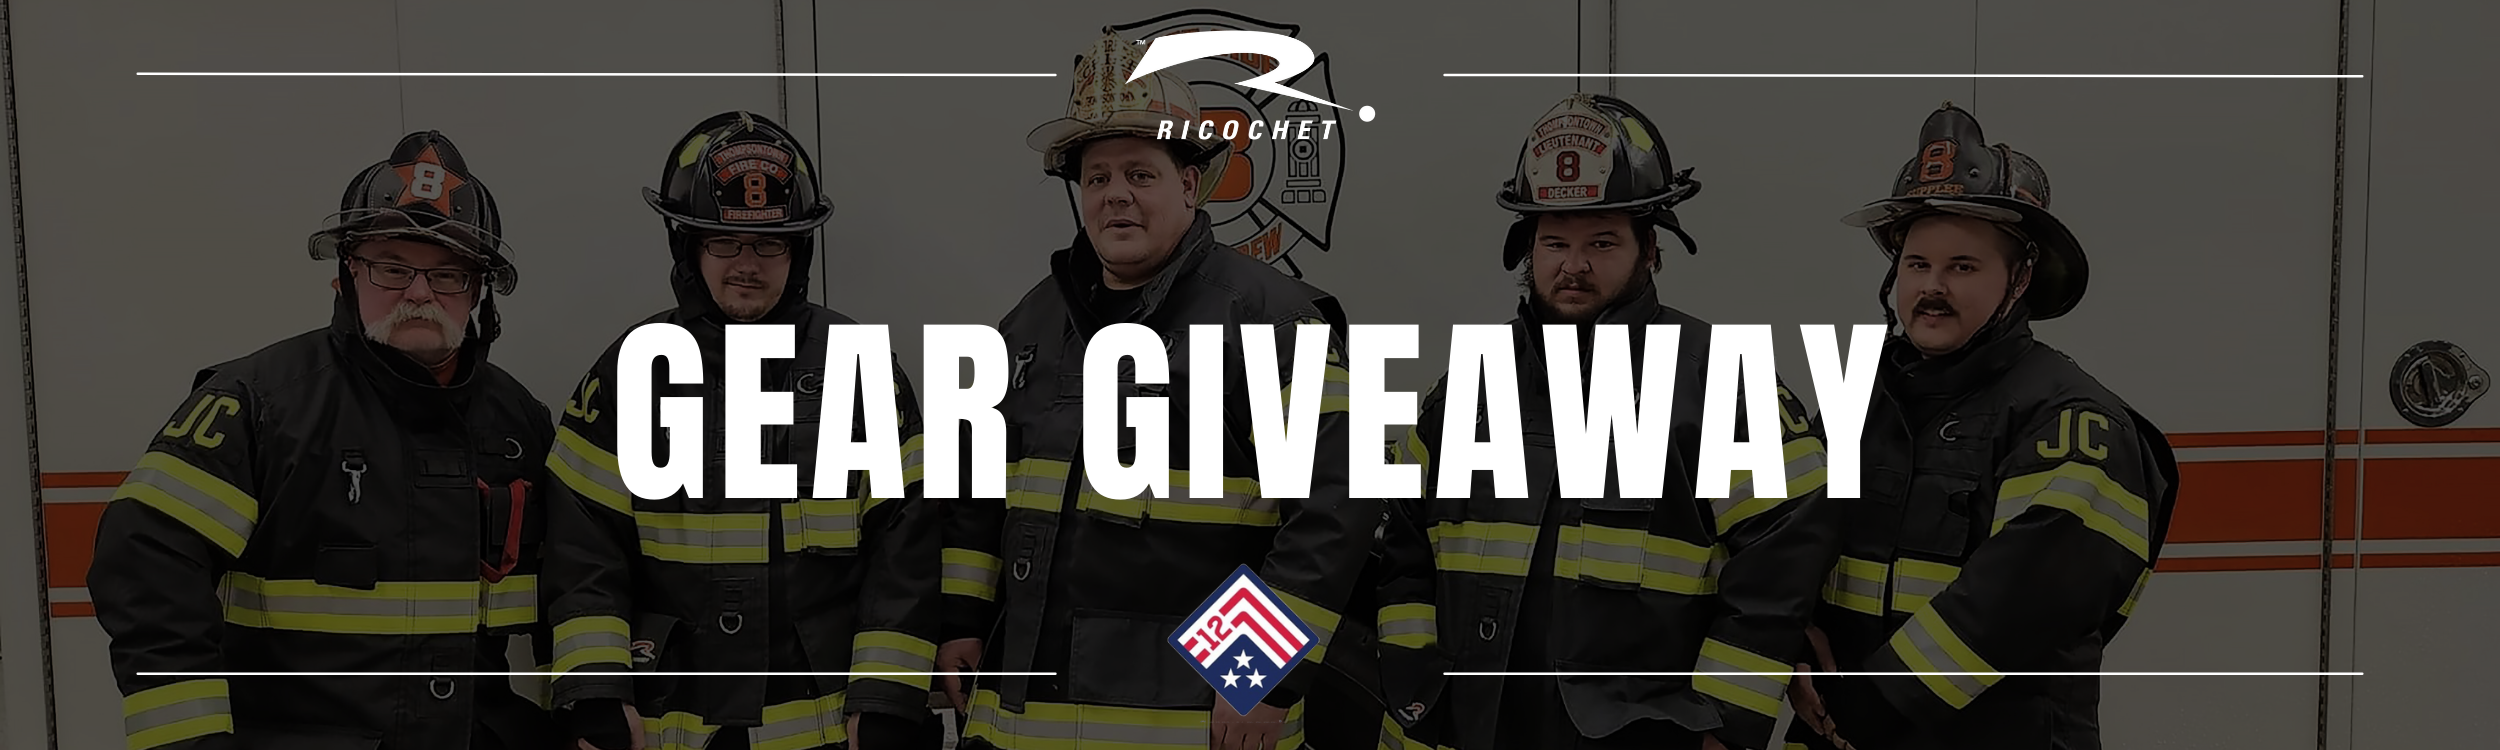 Ricochet Gear Giveaway Contest hosted in concert with Schwarber's Neighborhood Heroes